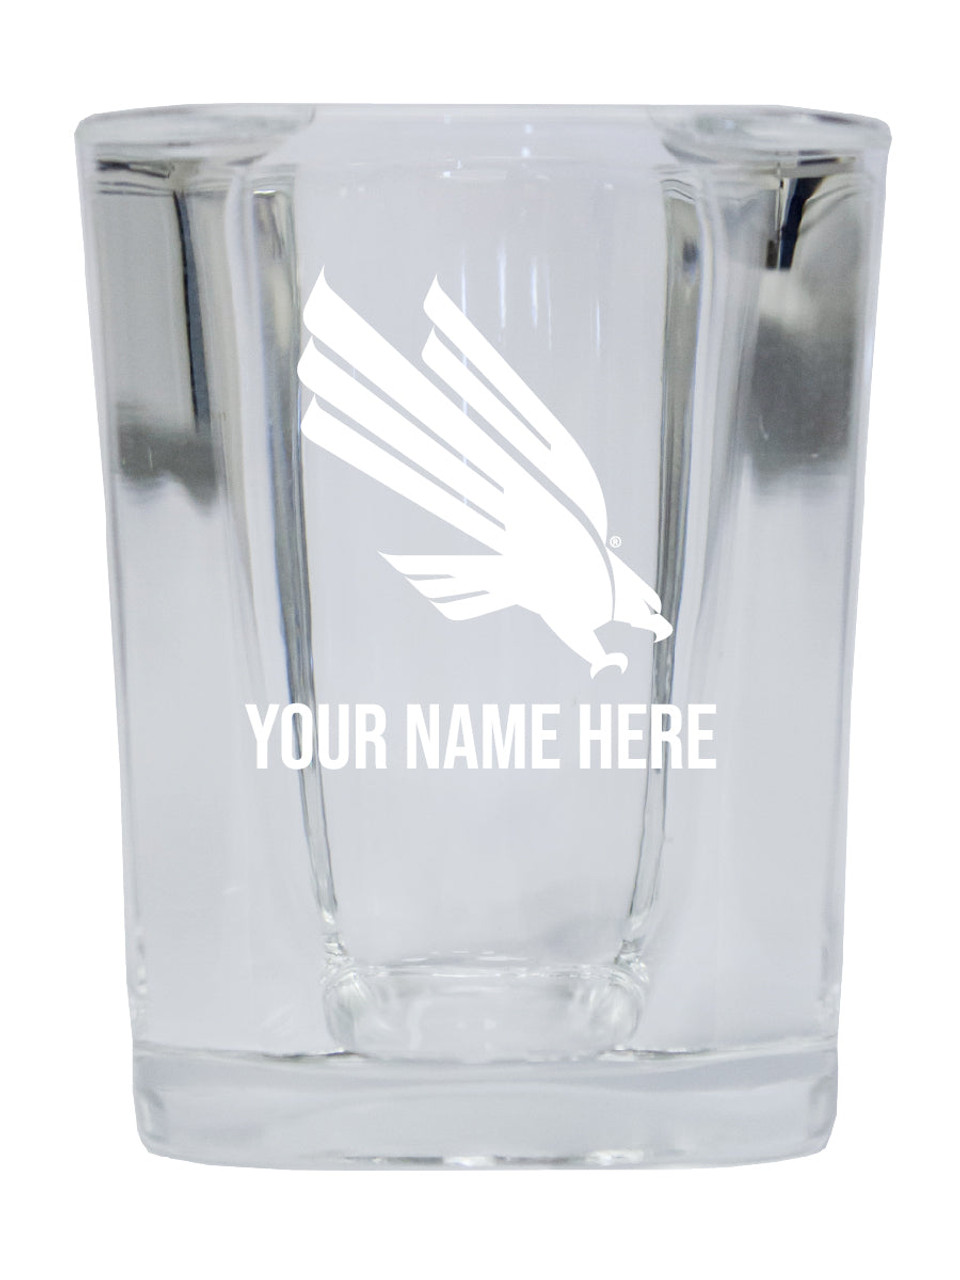 Personalized North Texas Etched Square Shot Glass 2 oz With Custom Name